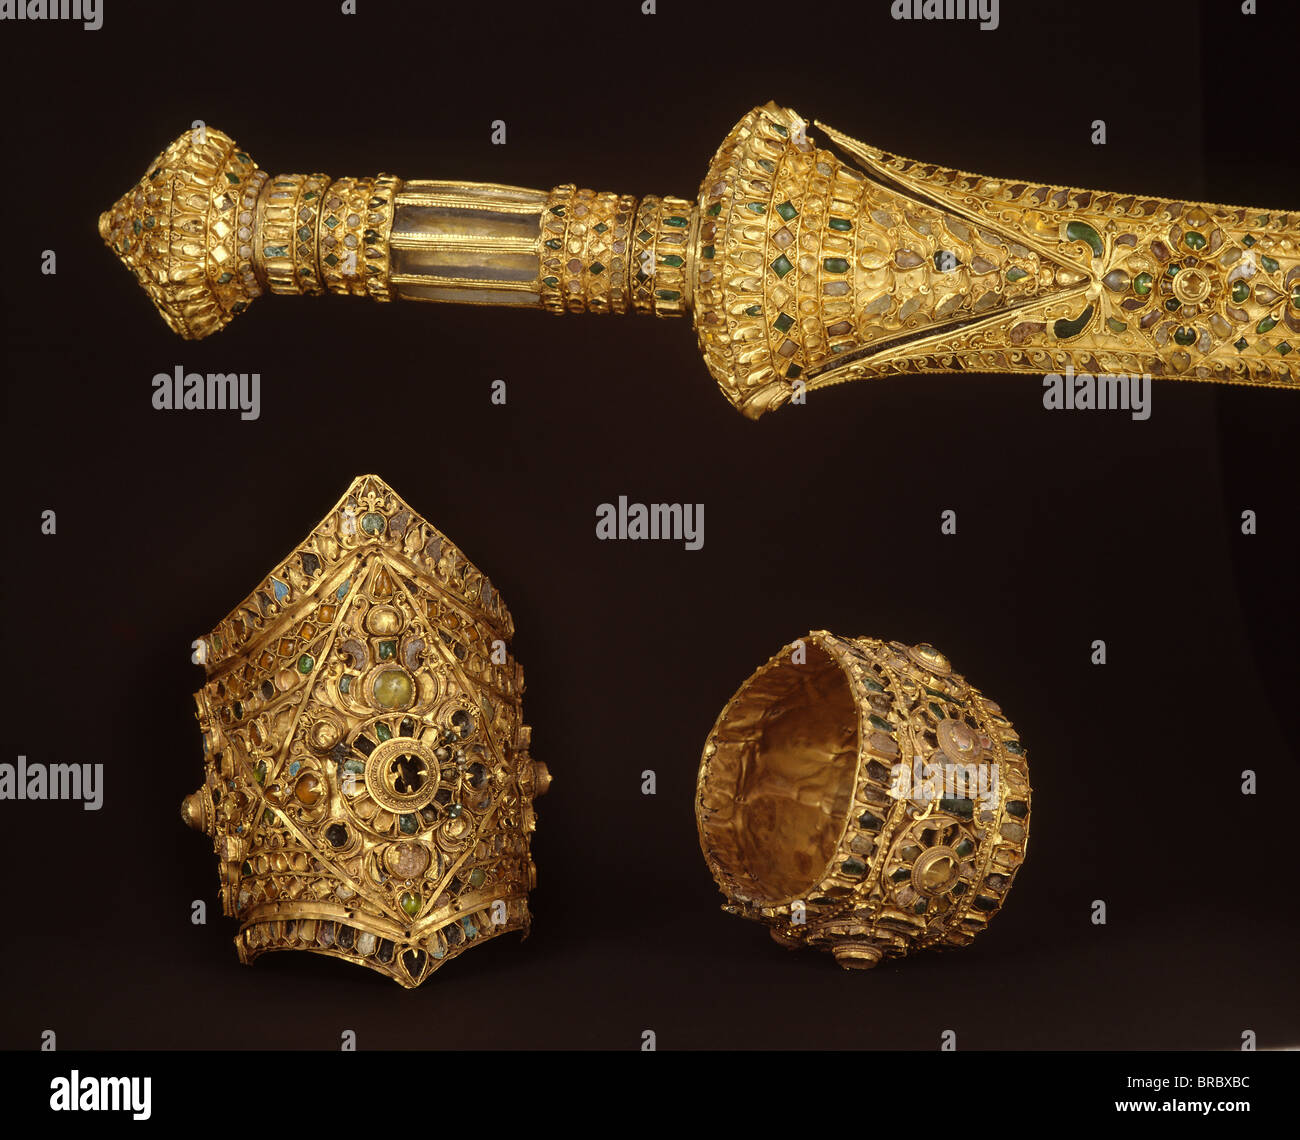 Royal gold sword and jewellery found in the crypt of Wat Ratburana, now in Ayutthaya National Museum, Thailand Stock Photo